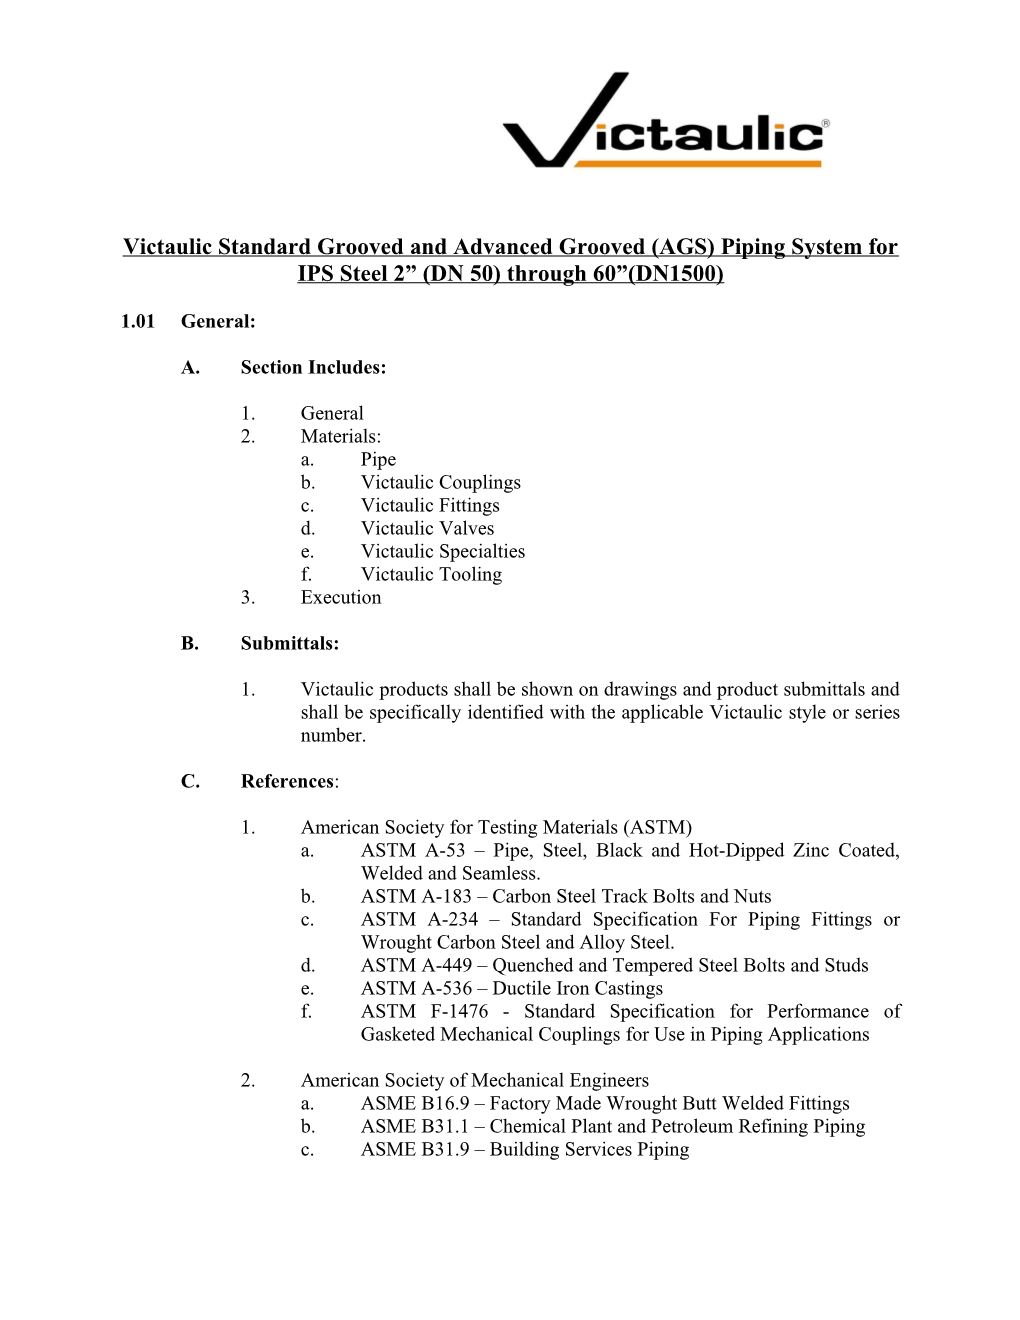 Victaulic Product Specification for Use with Carbon Steel Pipe